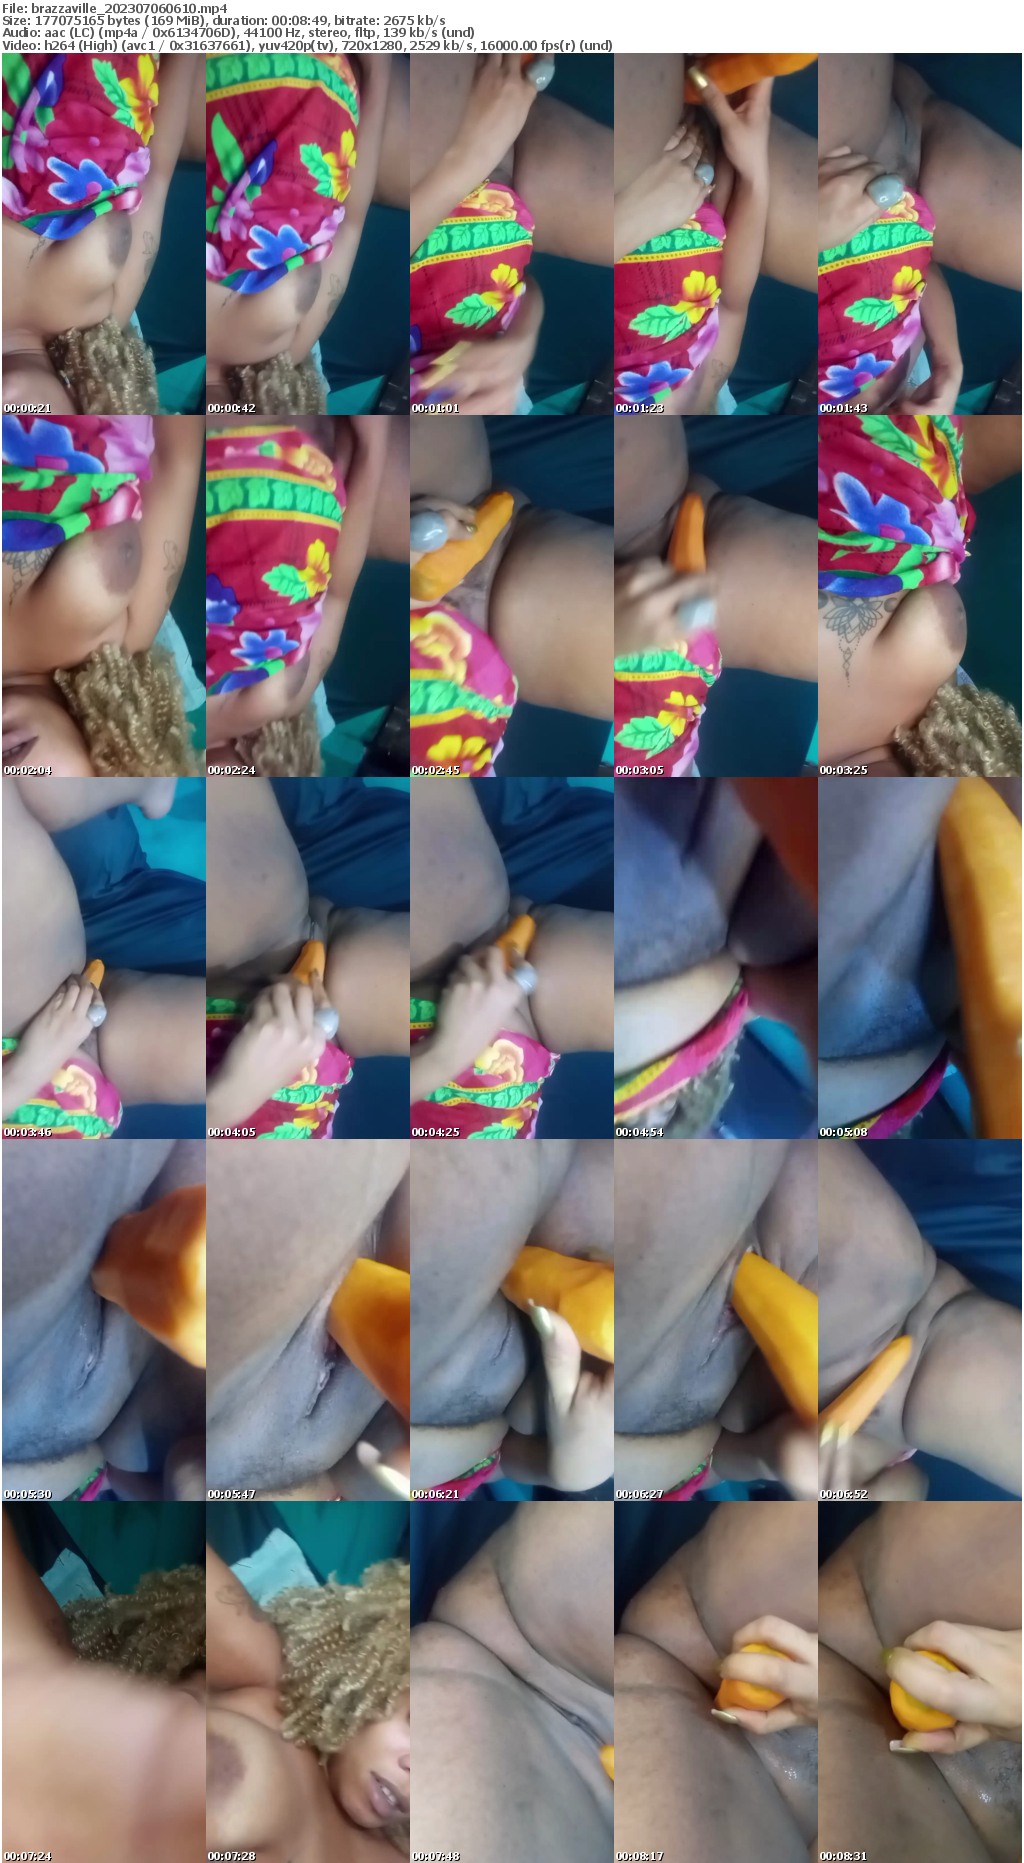 Preview thumb from brazzaville on 2023-07-06 @ cam4